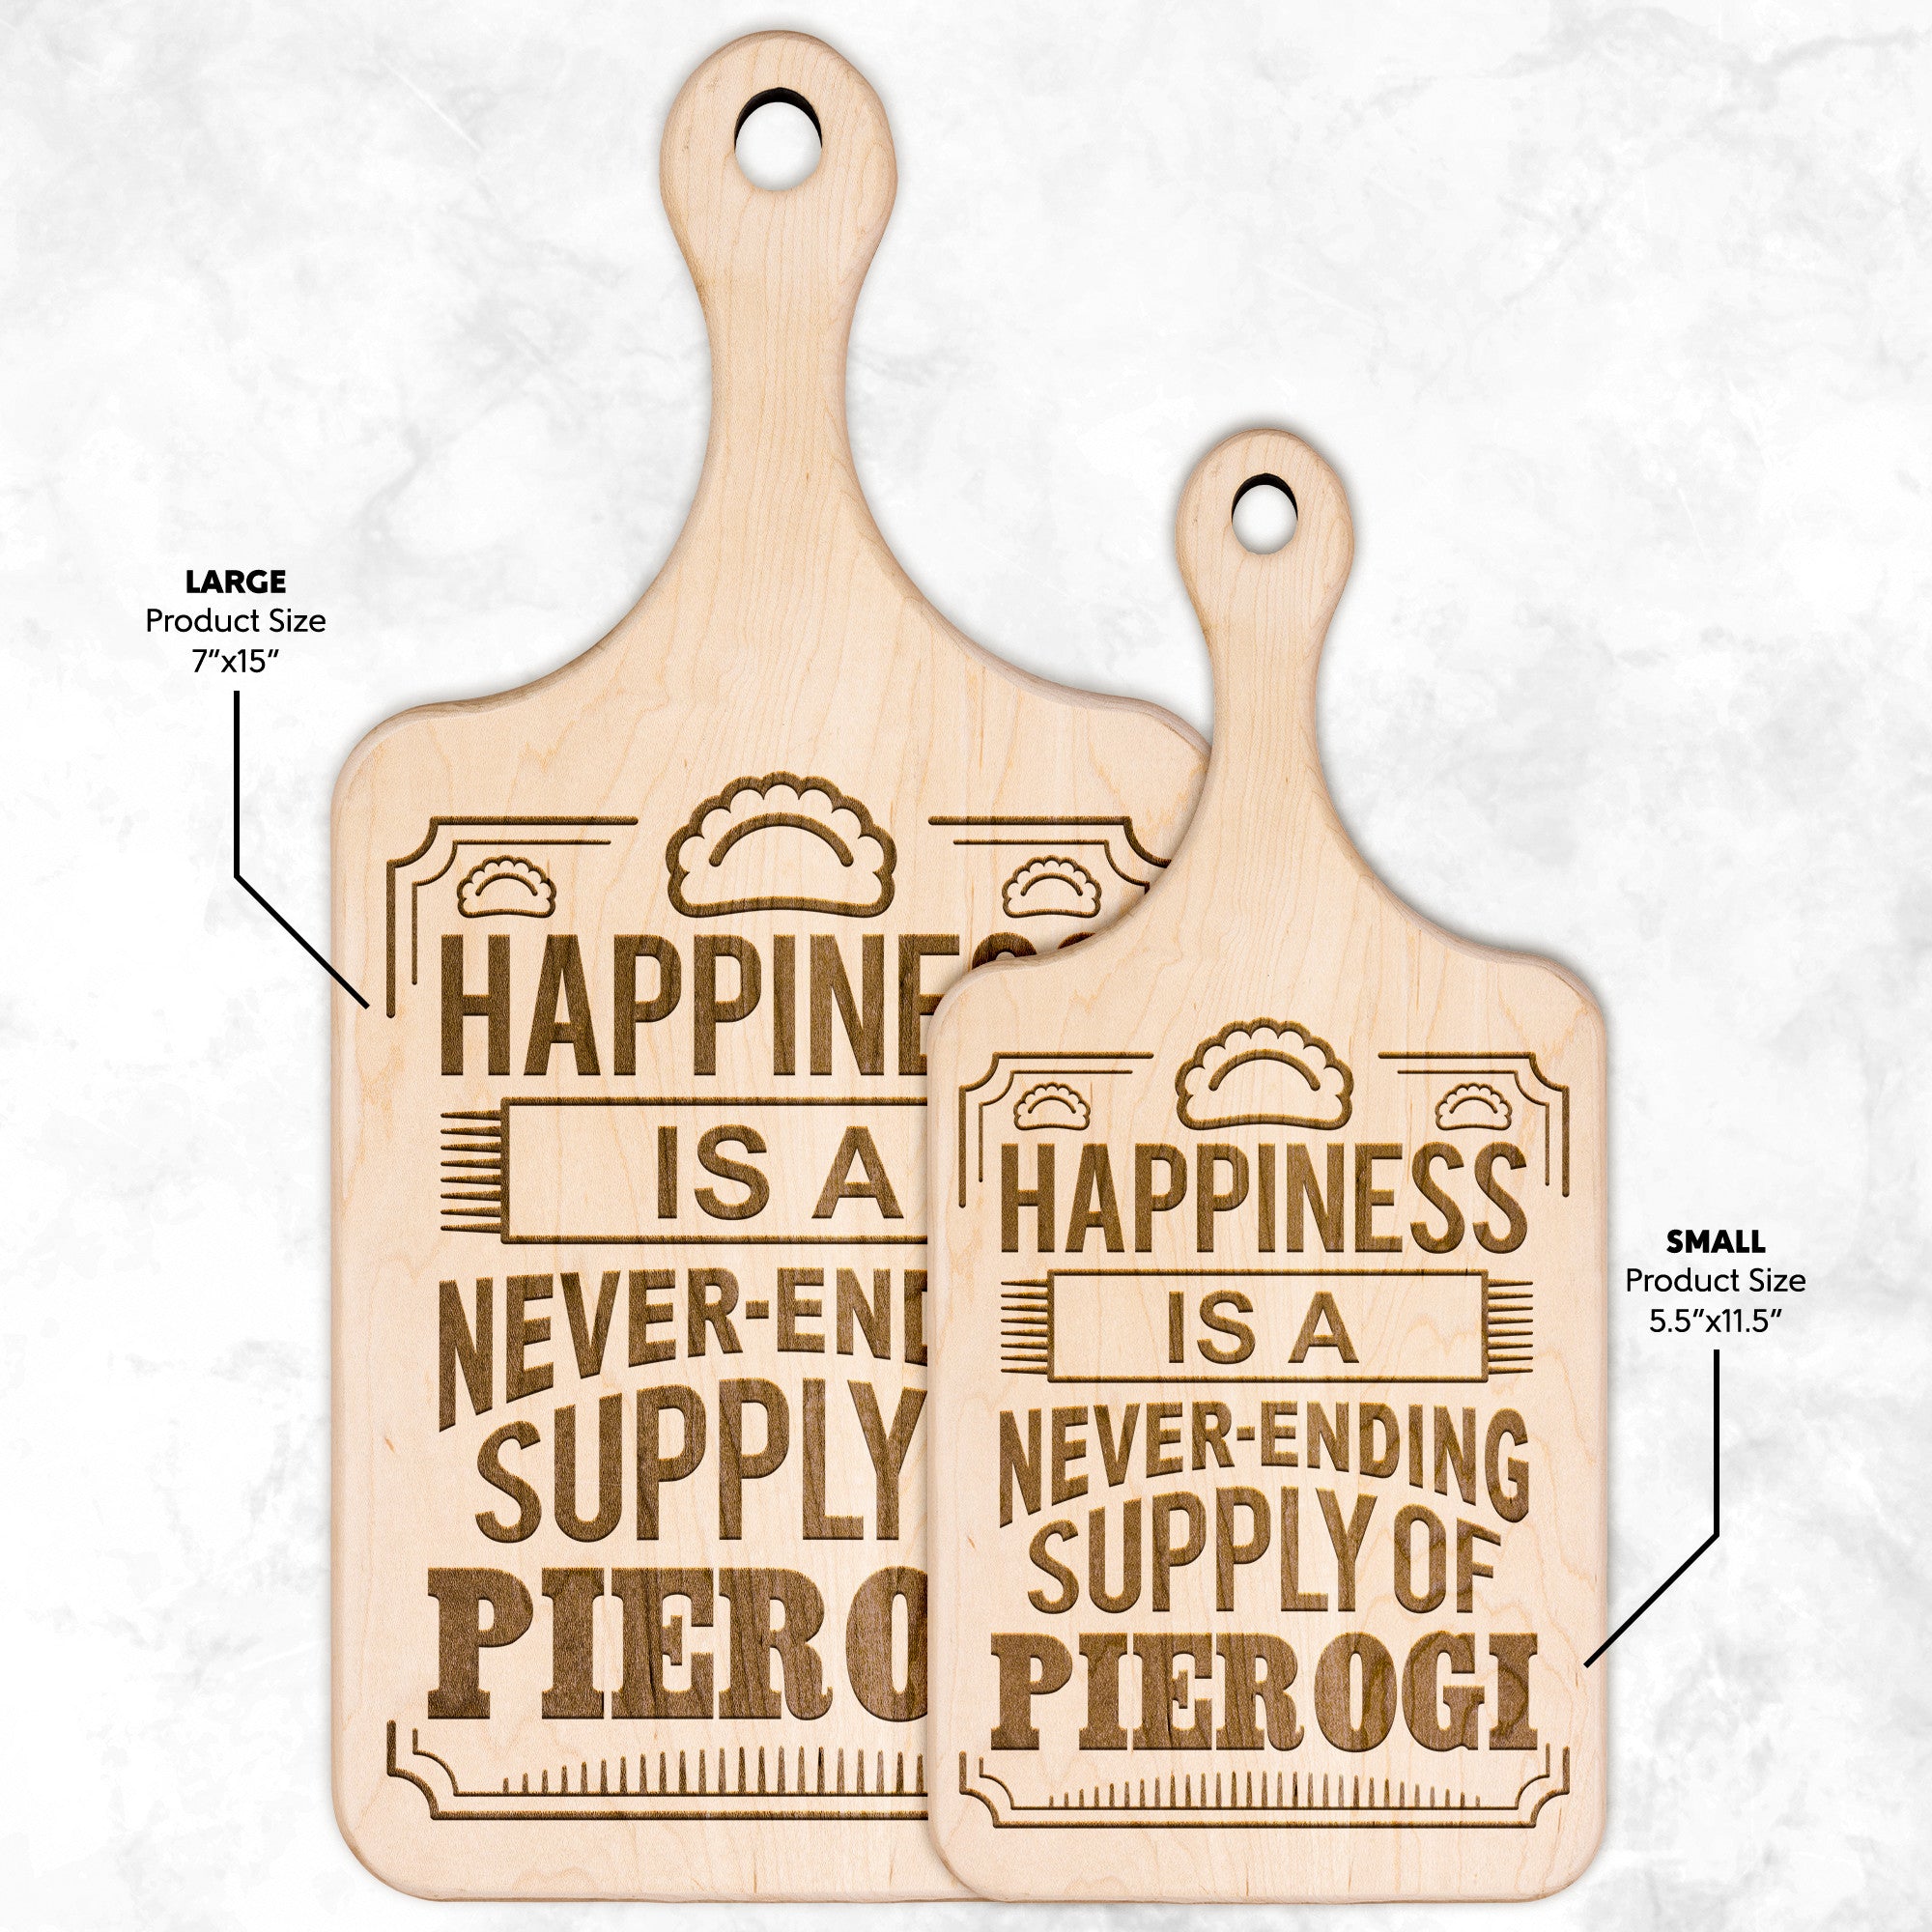 Happiness Is A Never Ending Supply Of Pierogi Hardwood Paddle Cutting Board Kitchenware teelaunch   